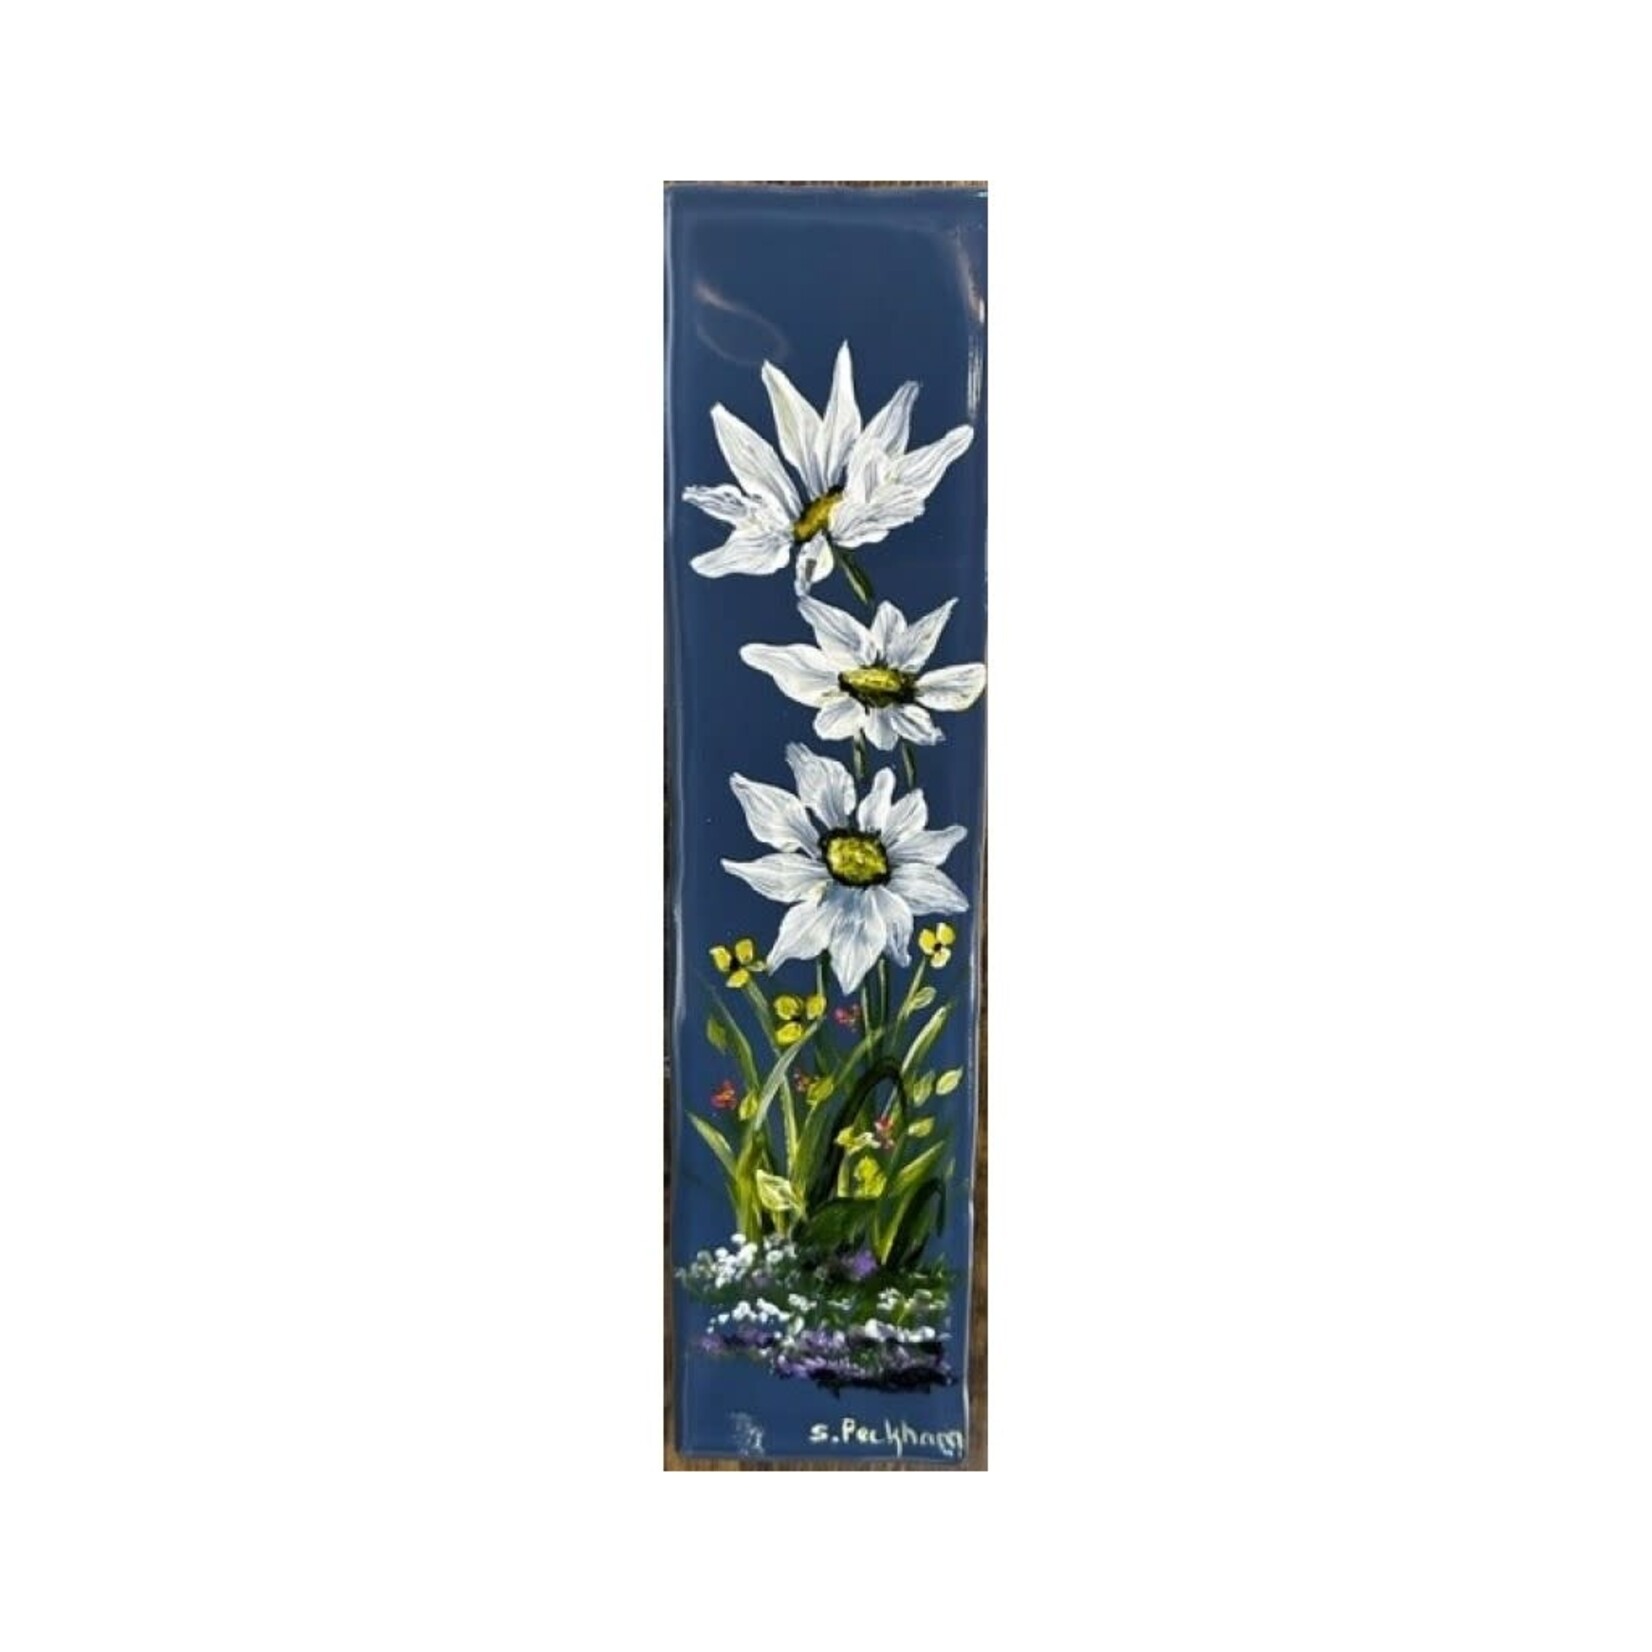 Hand-Painted Tile - Daisy on Blue